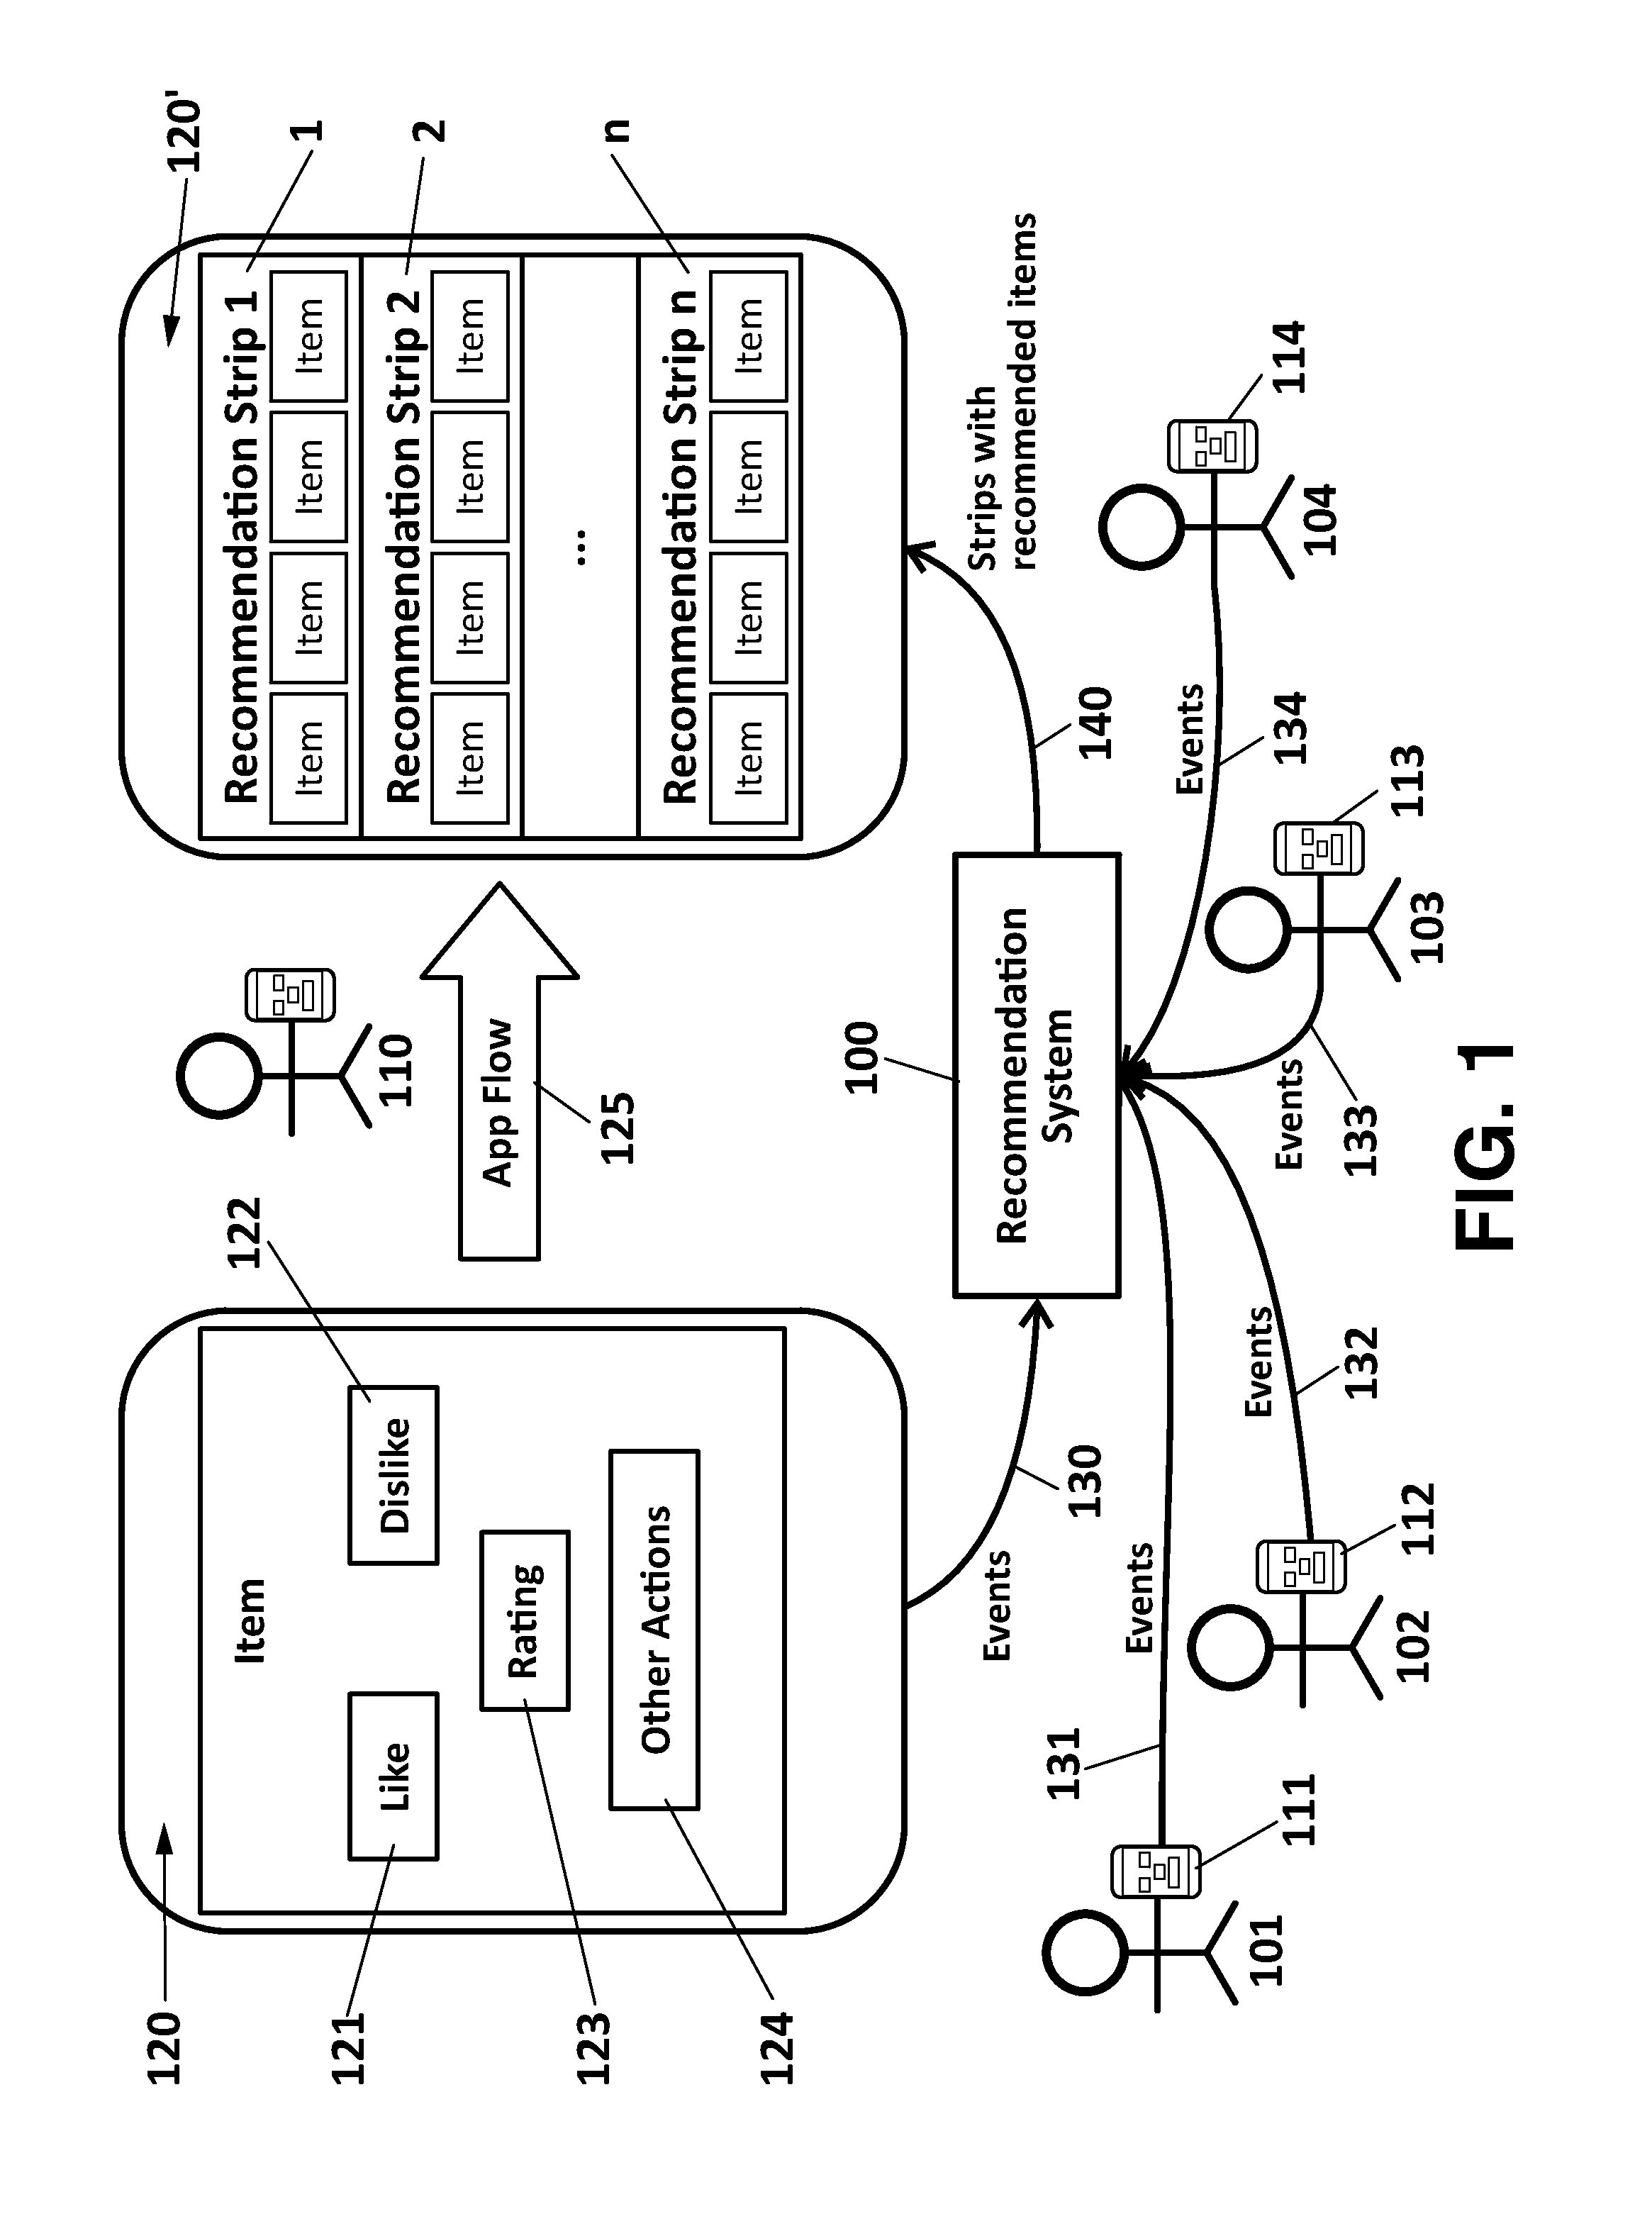 Method and system for providing multimedia content recommendations